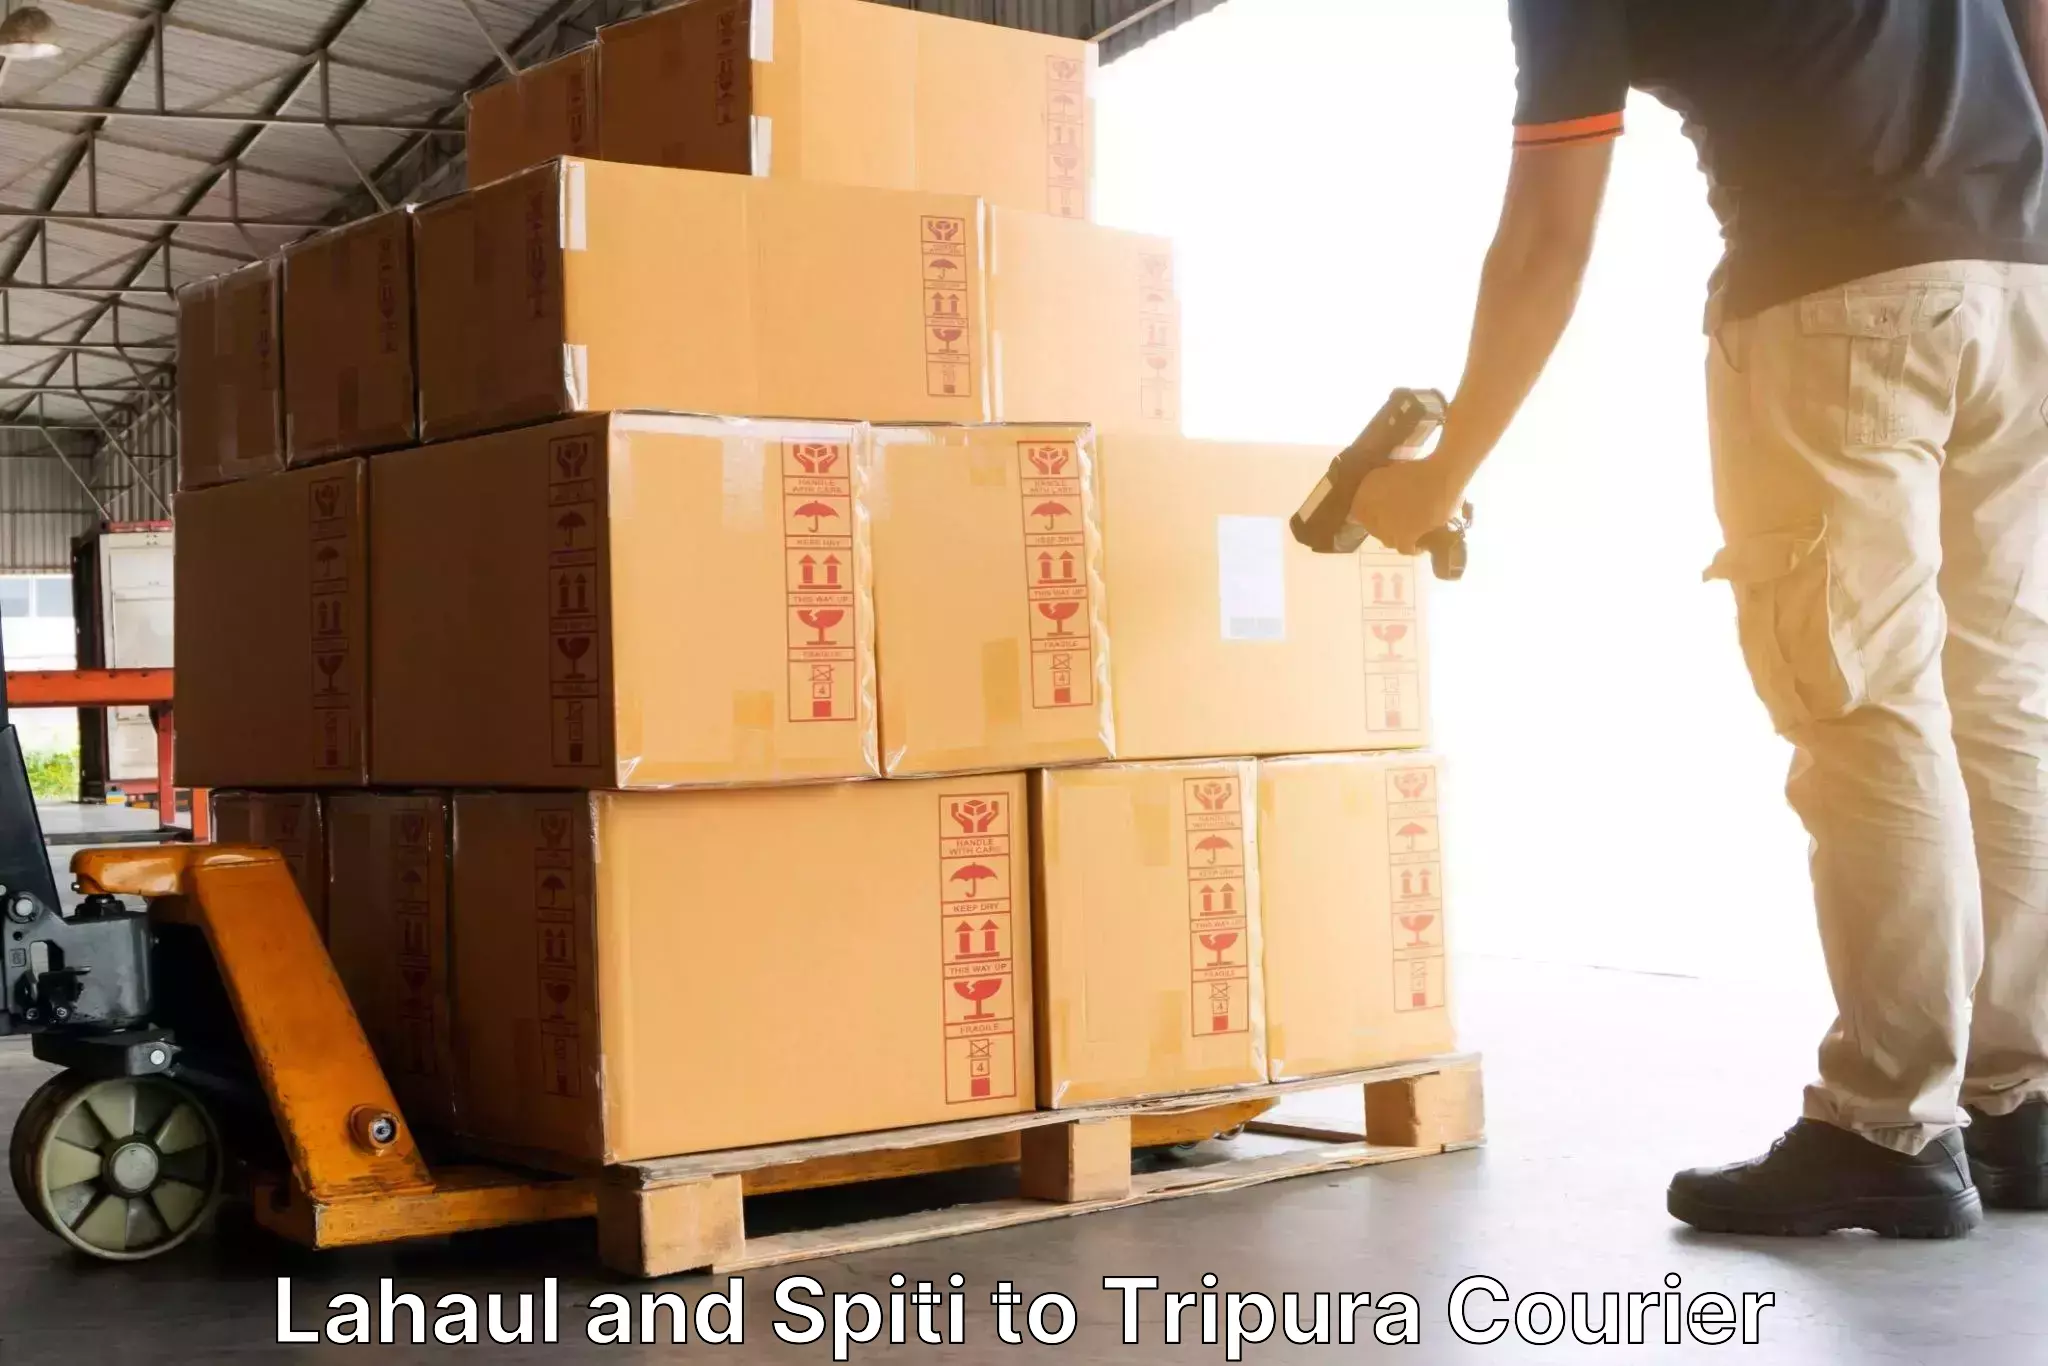 Advanced package delivery Lahaul and Spiti to Udaipur Tripura